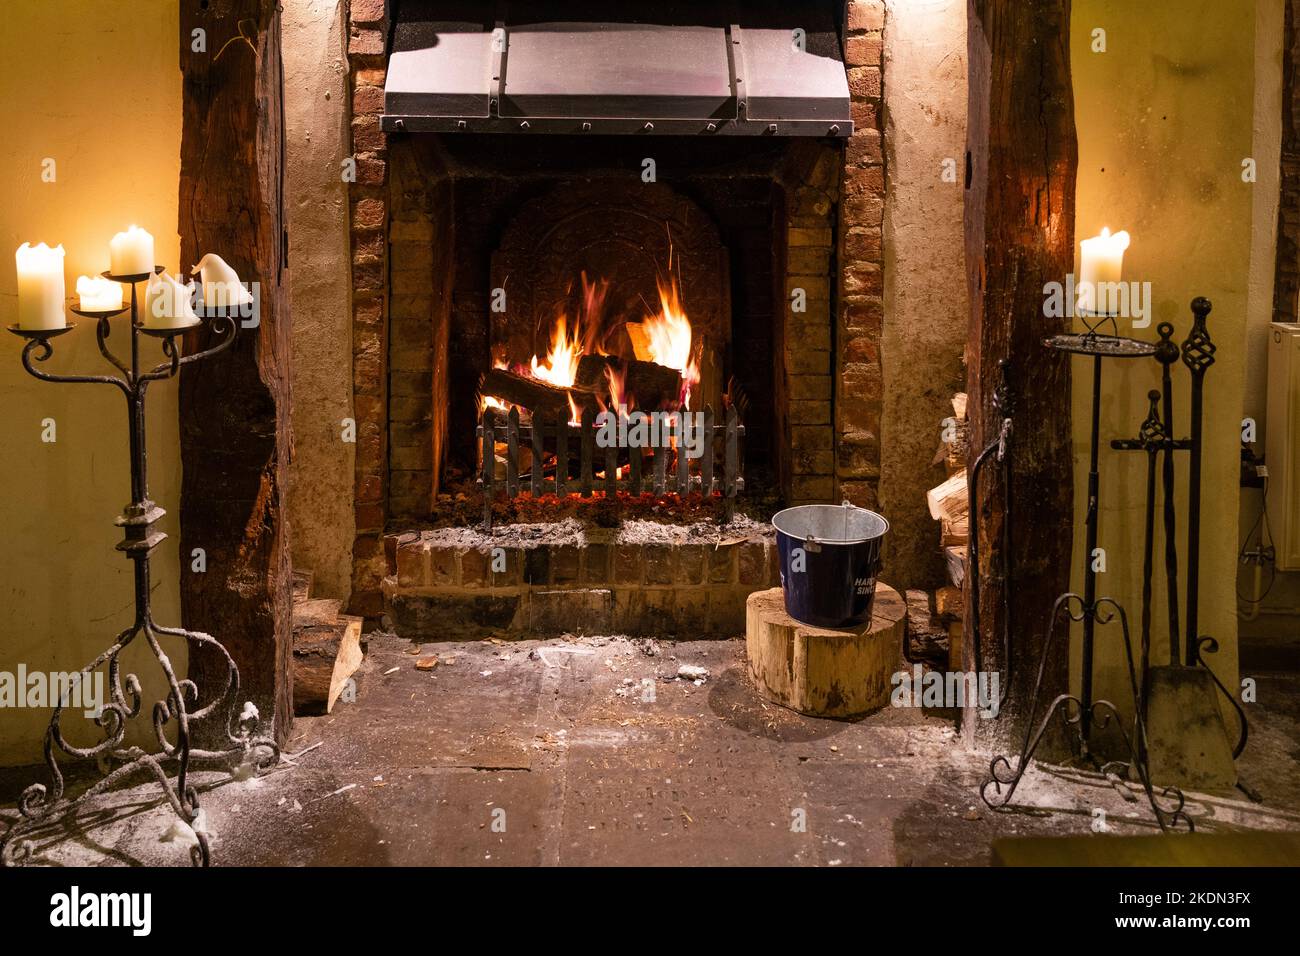 A fire blazing in a traditional fireplace with candles alight on ornate candlesticks in the Millstone restaurant at Bartons Mill, Basingstoke, UK Stock Photo